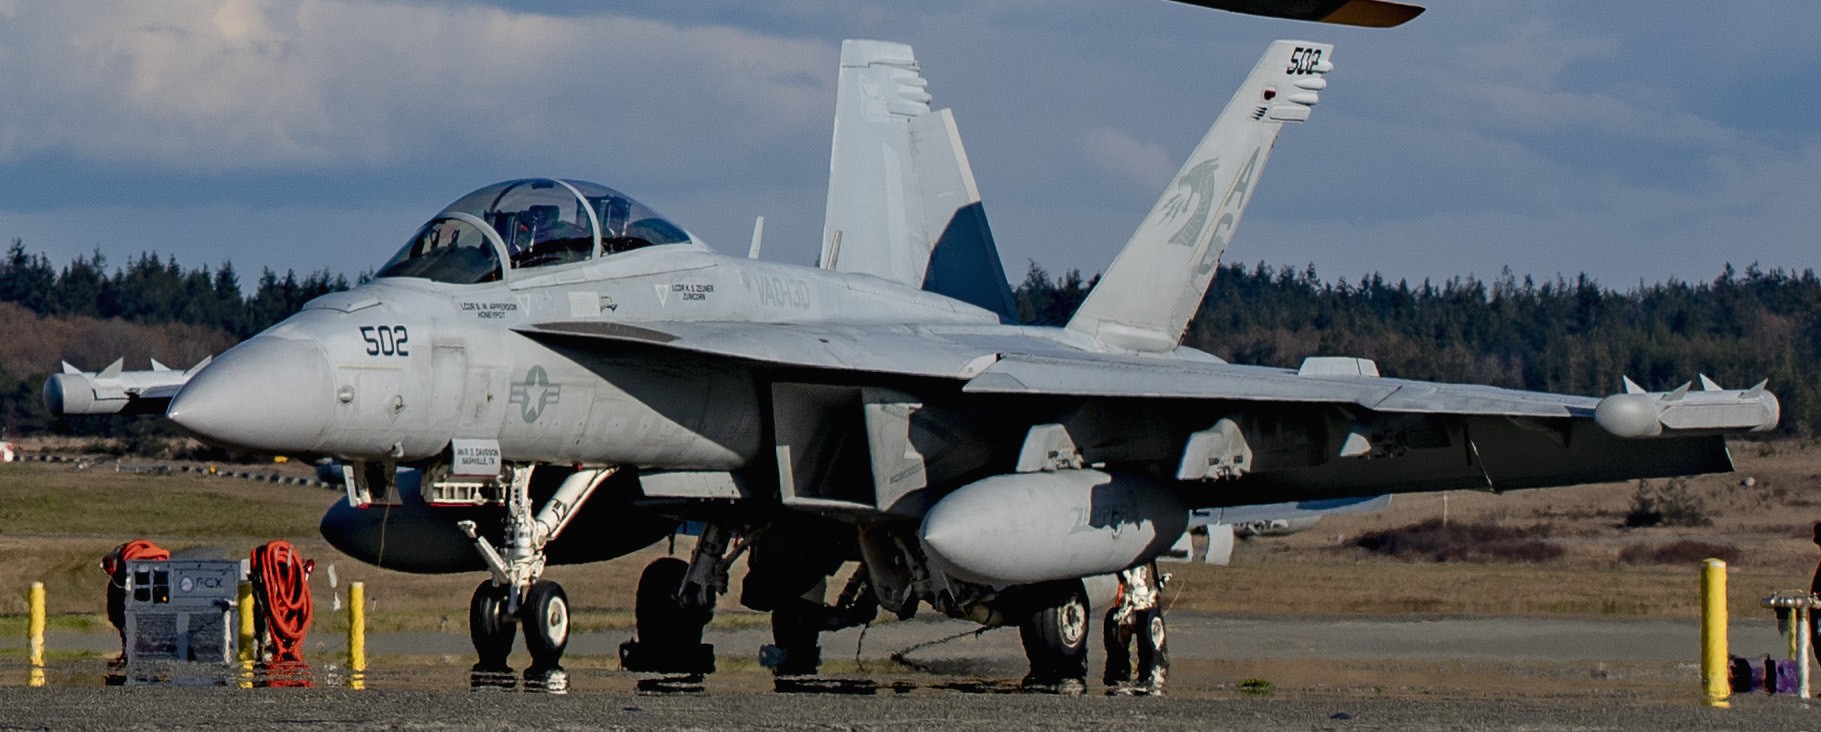 vaq-130 zappers electronic attack squadron vaqron us navy boeing ea-18g growler nas whidbey island washington 104